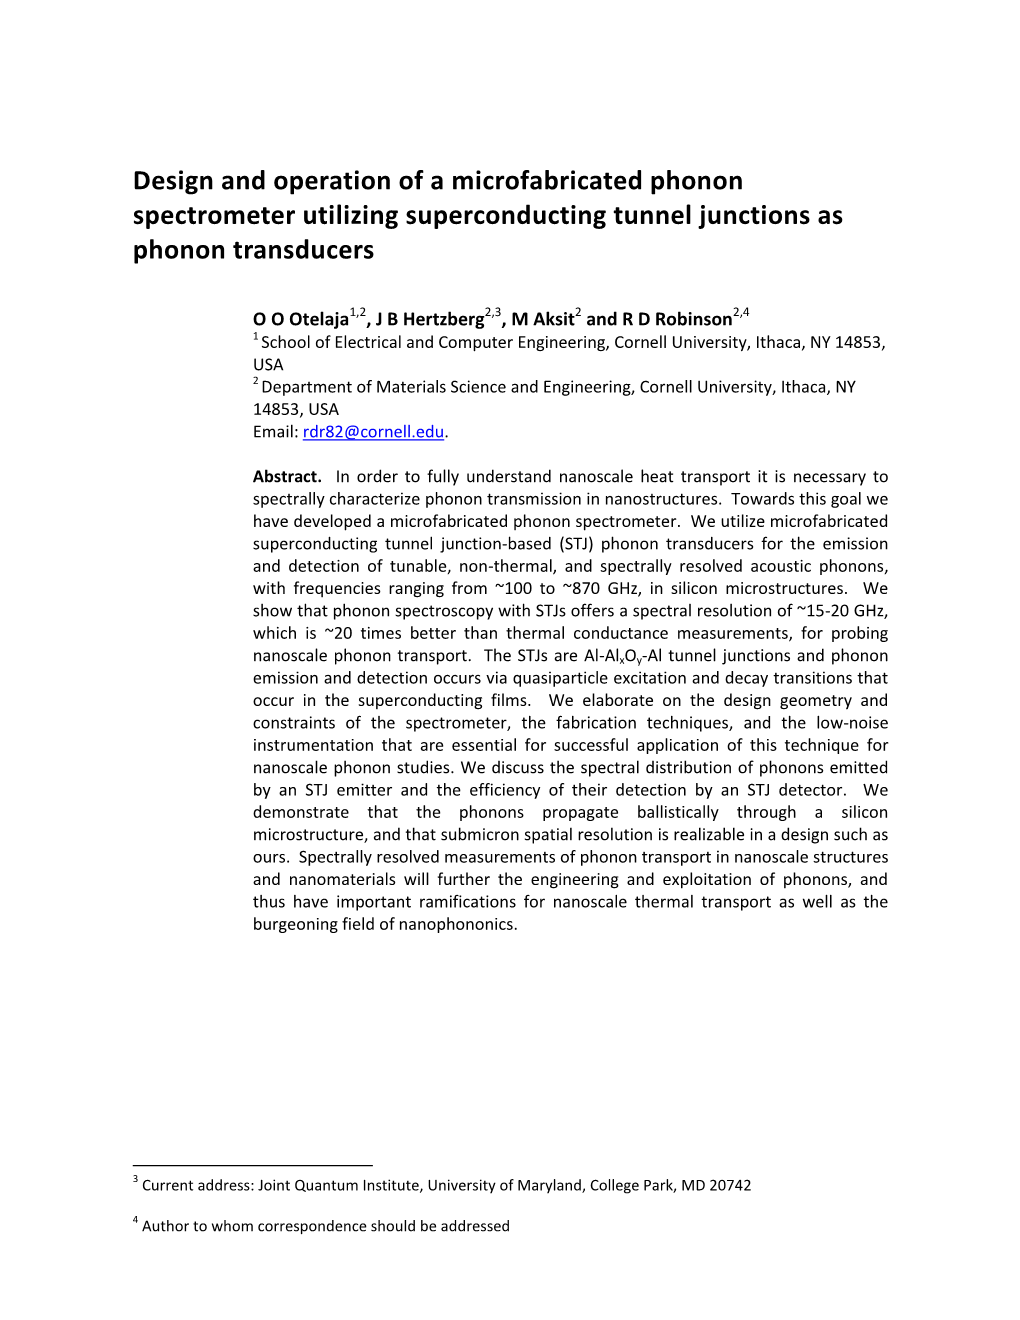 Design and Operation of a Microfabricated Phonon Spectrometer Utilizing Superconducting Tunnel Junctions As Phonon Transducers